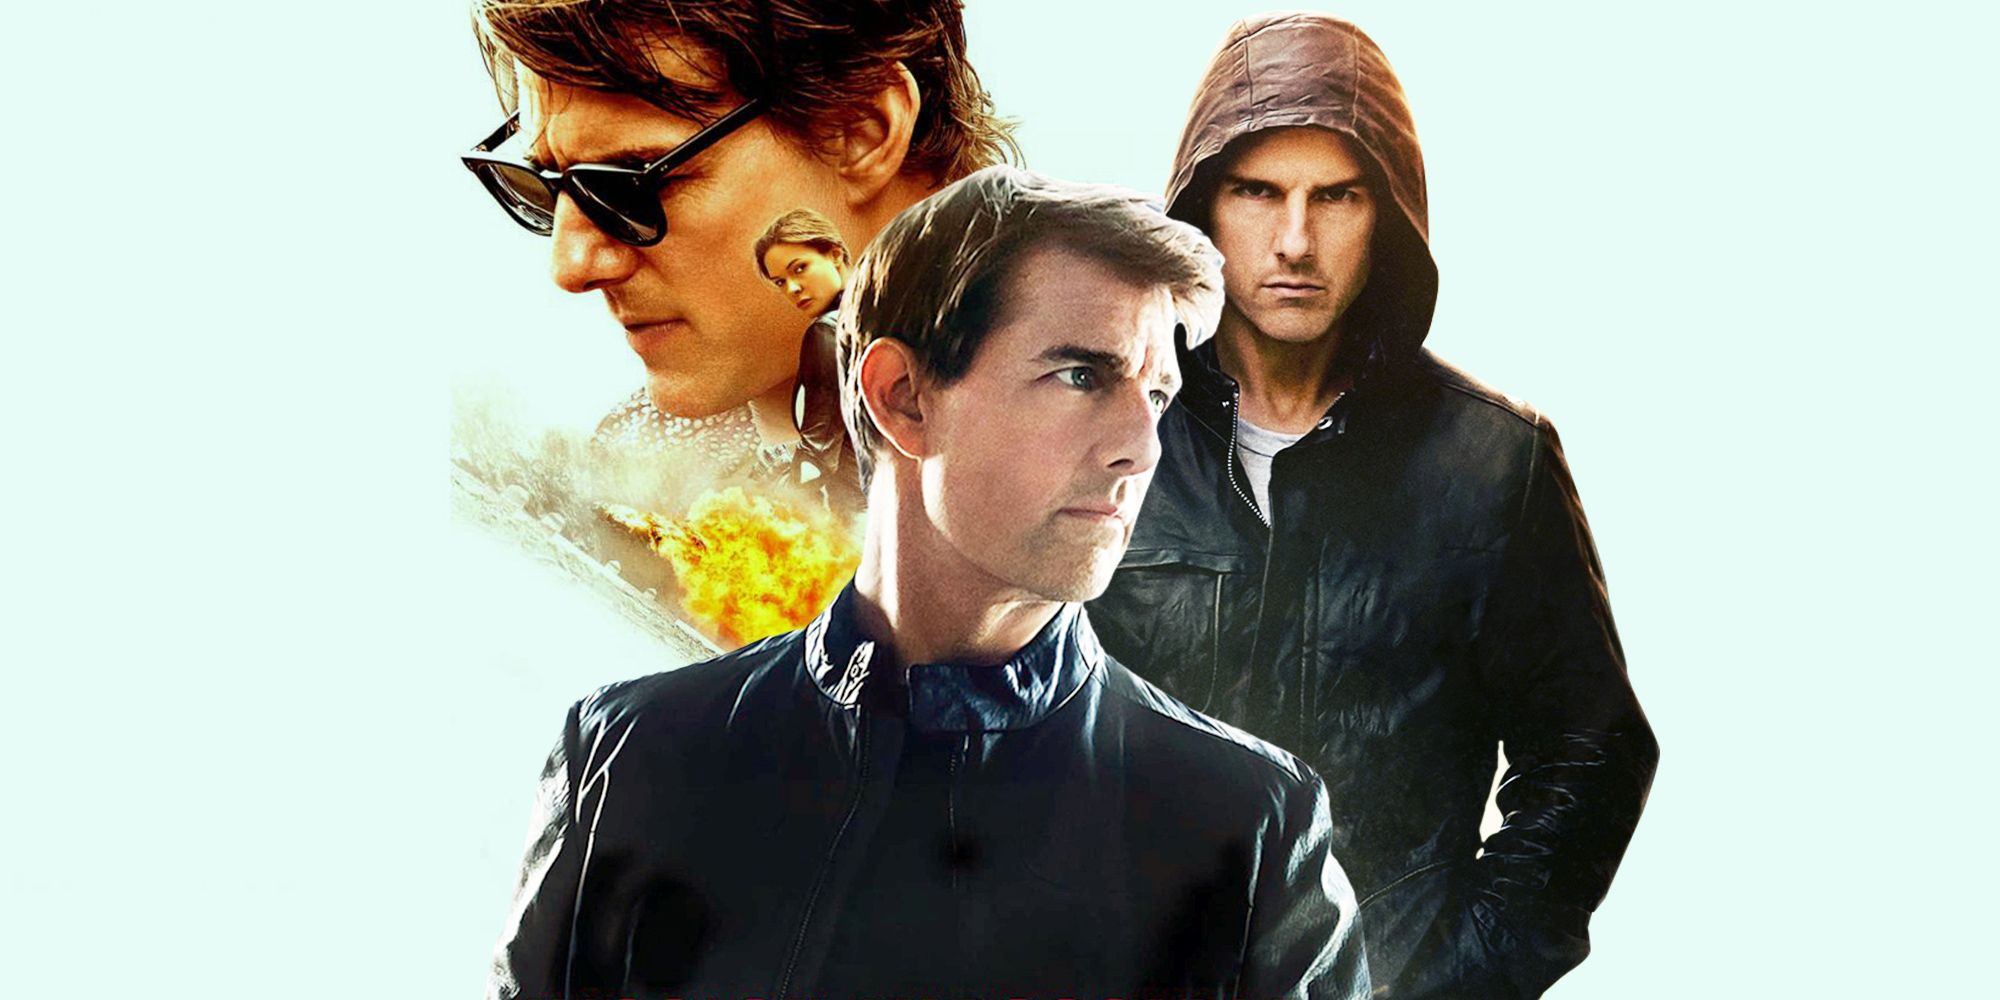 Dead Reckoning Part One is actually Mission: Impossible as comedy - Polygon